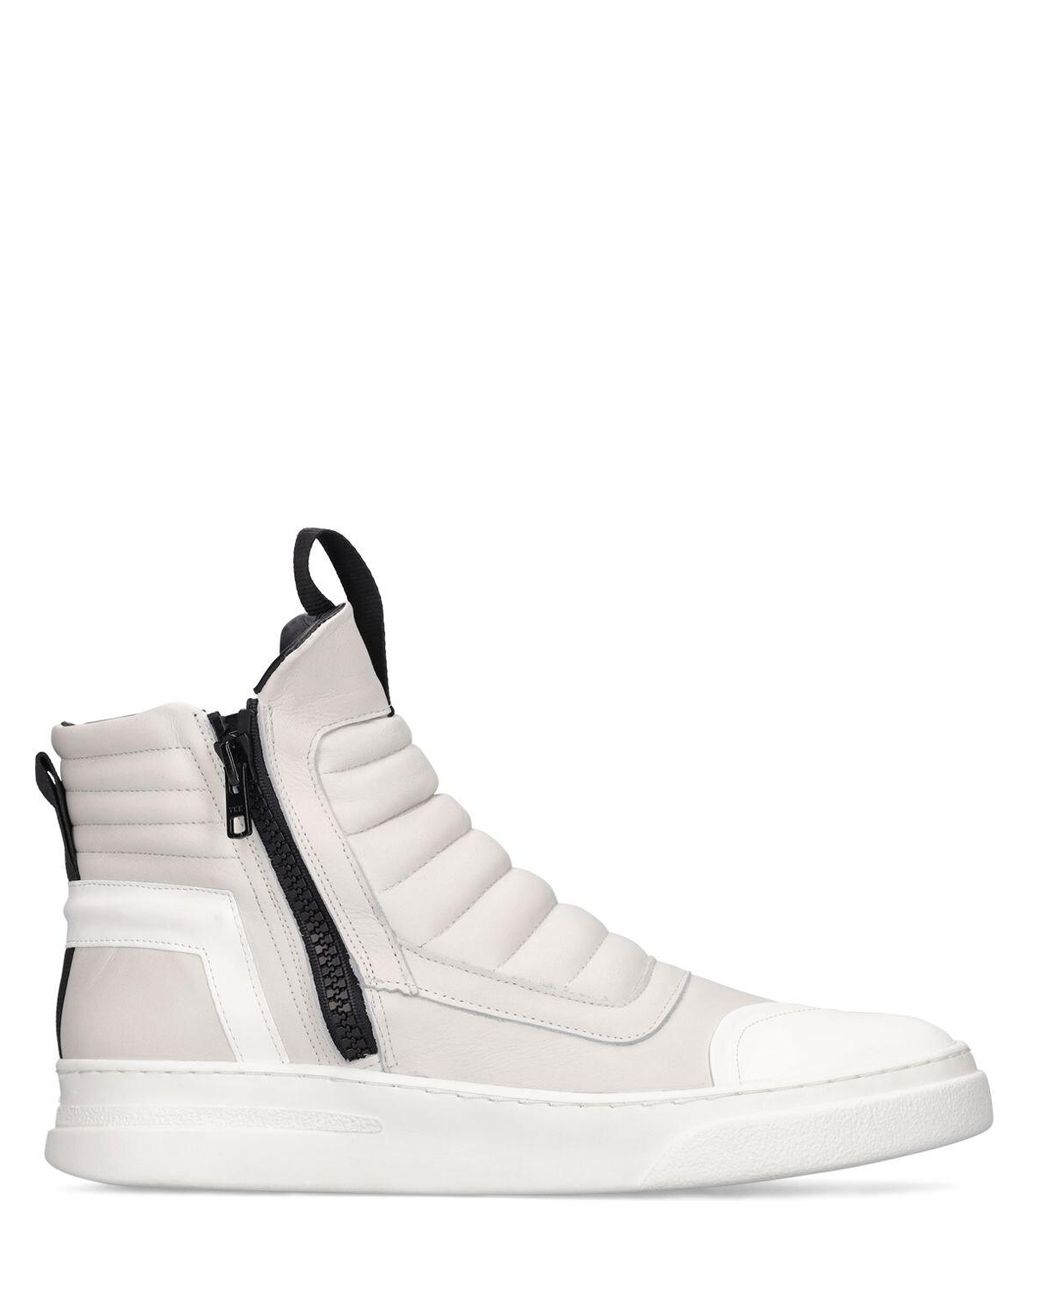 Bruno Bordese Nappa High Sneakers With Zip in White for Men | Lyst Canada